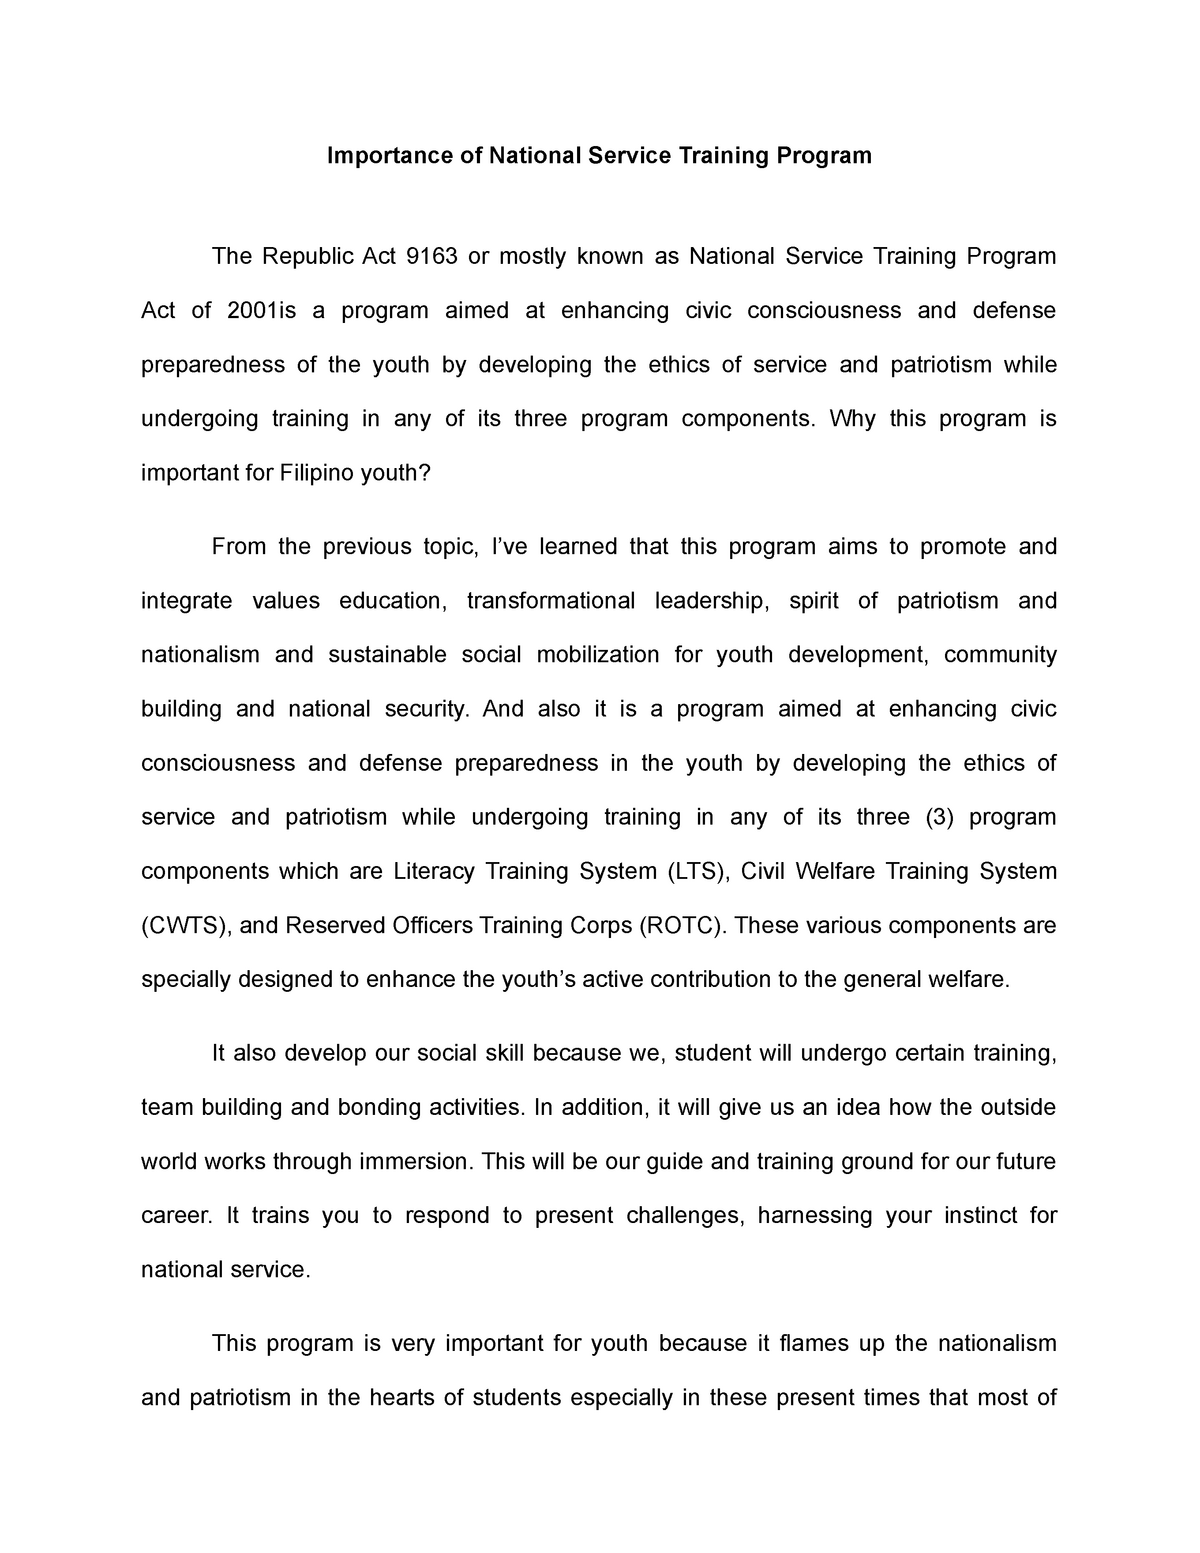 essay about importance of service